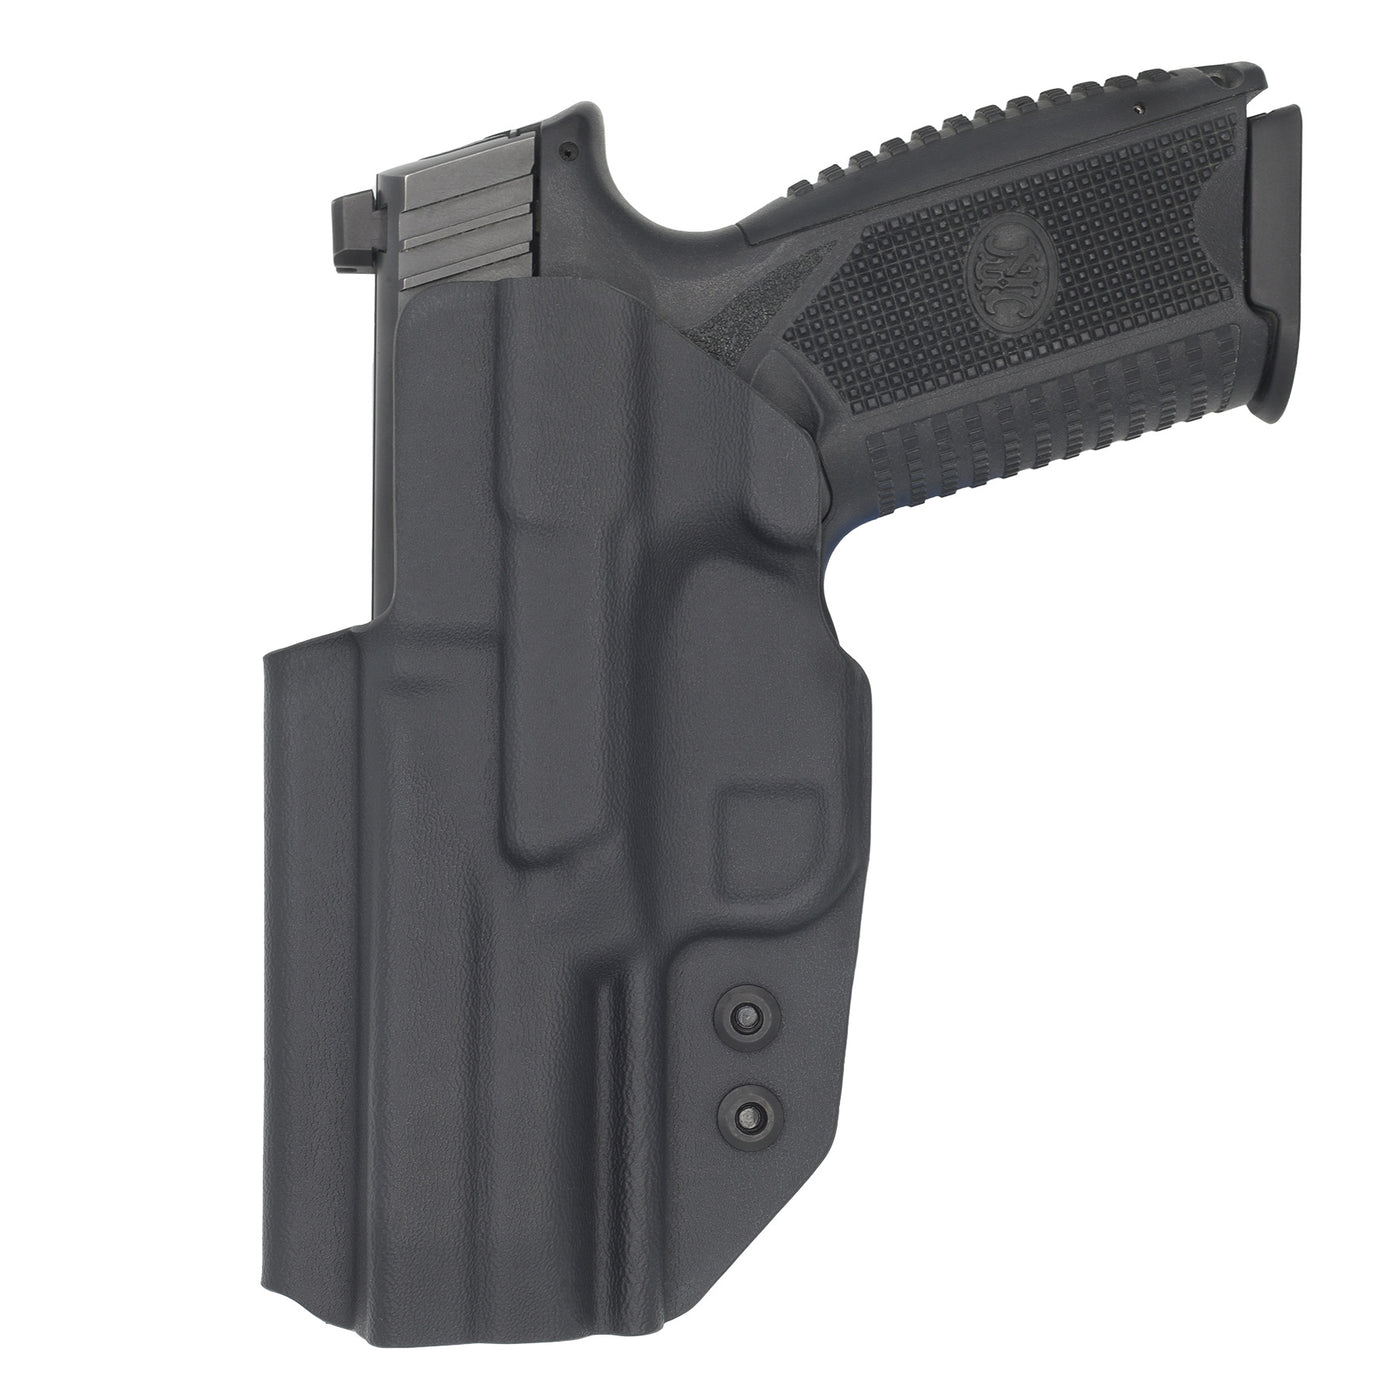 Kydex Holster made by C and G Holsters. backside of the holster showing sweatguard and tall sight channel. For the FN509T. This shows the FN509 in the Holstered Position.